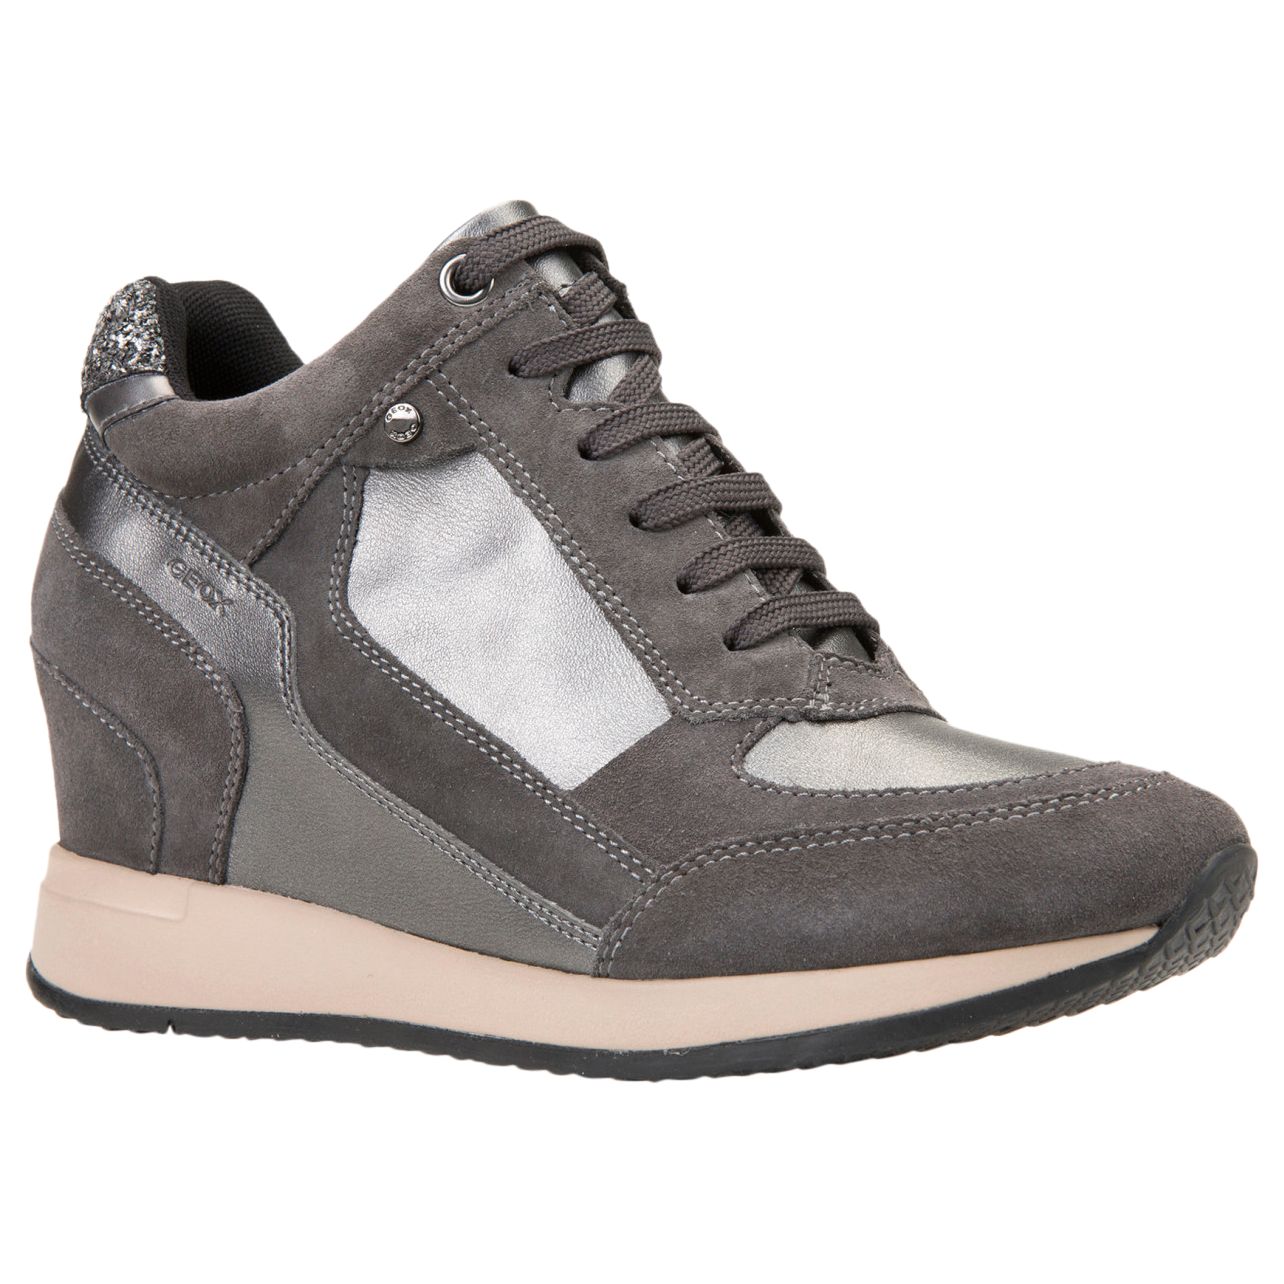 geox nydame wedge trainers